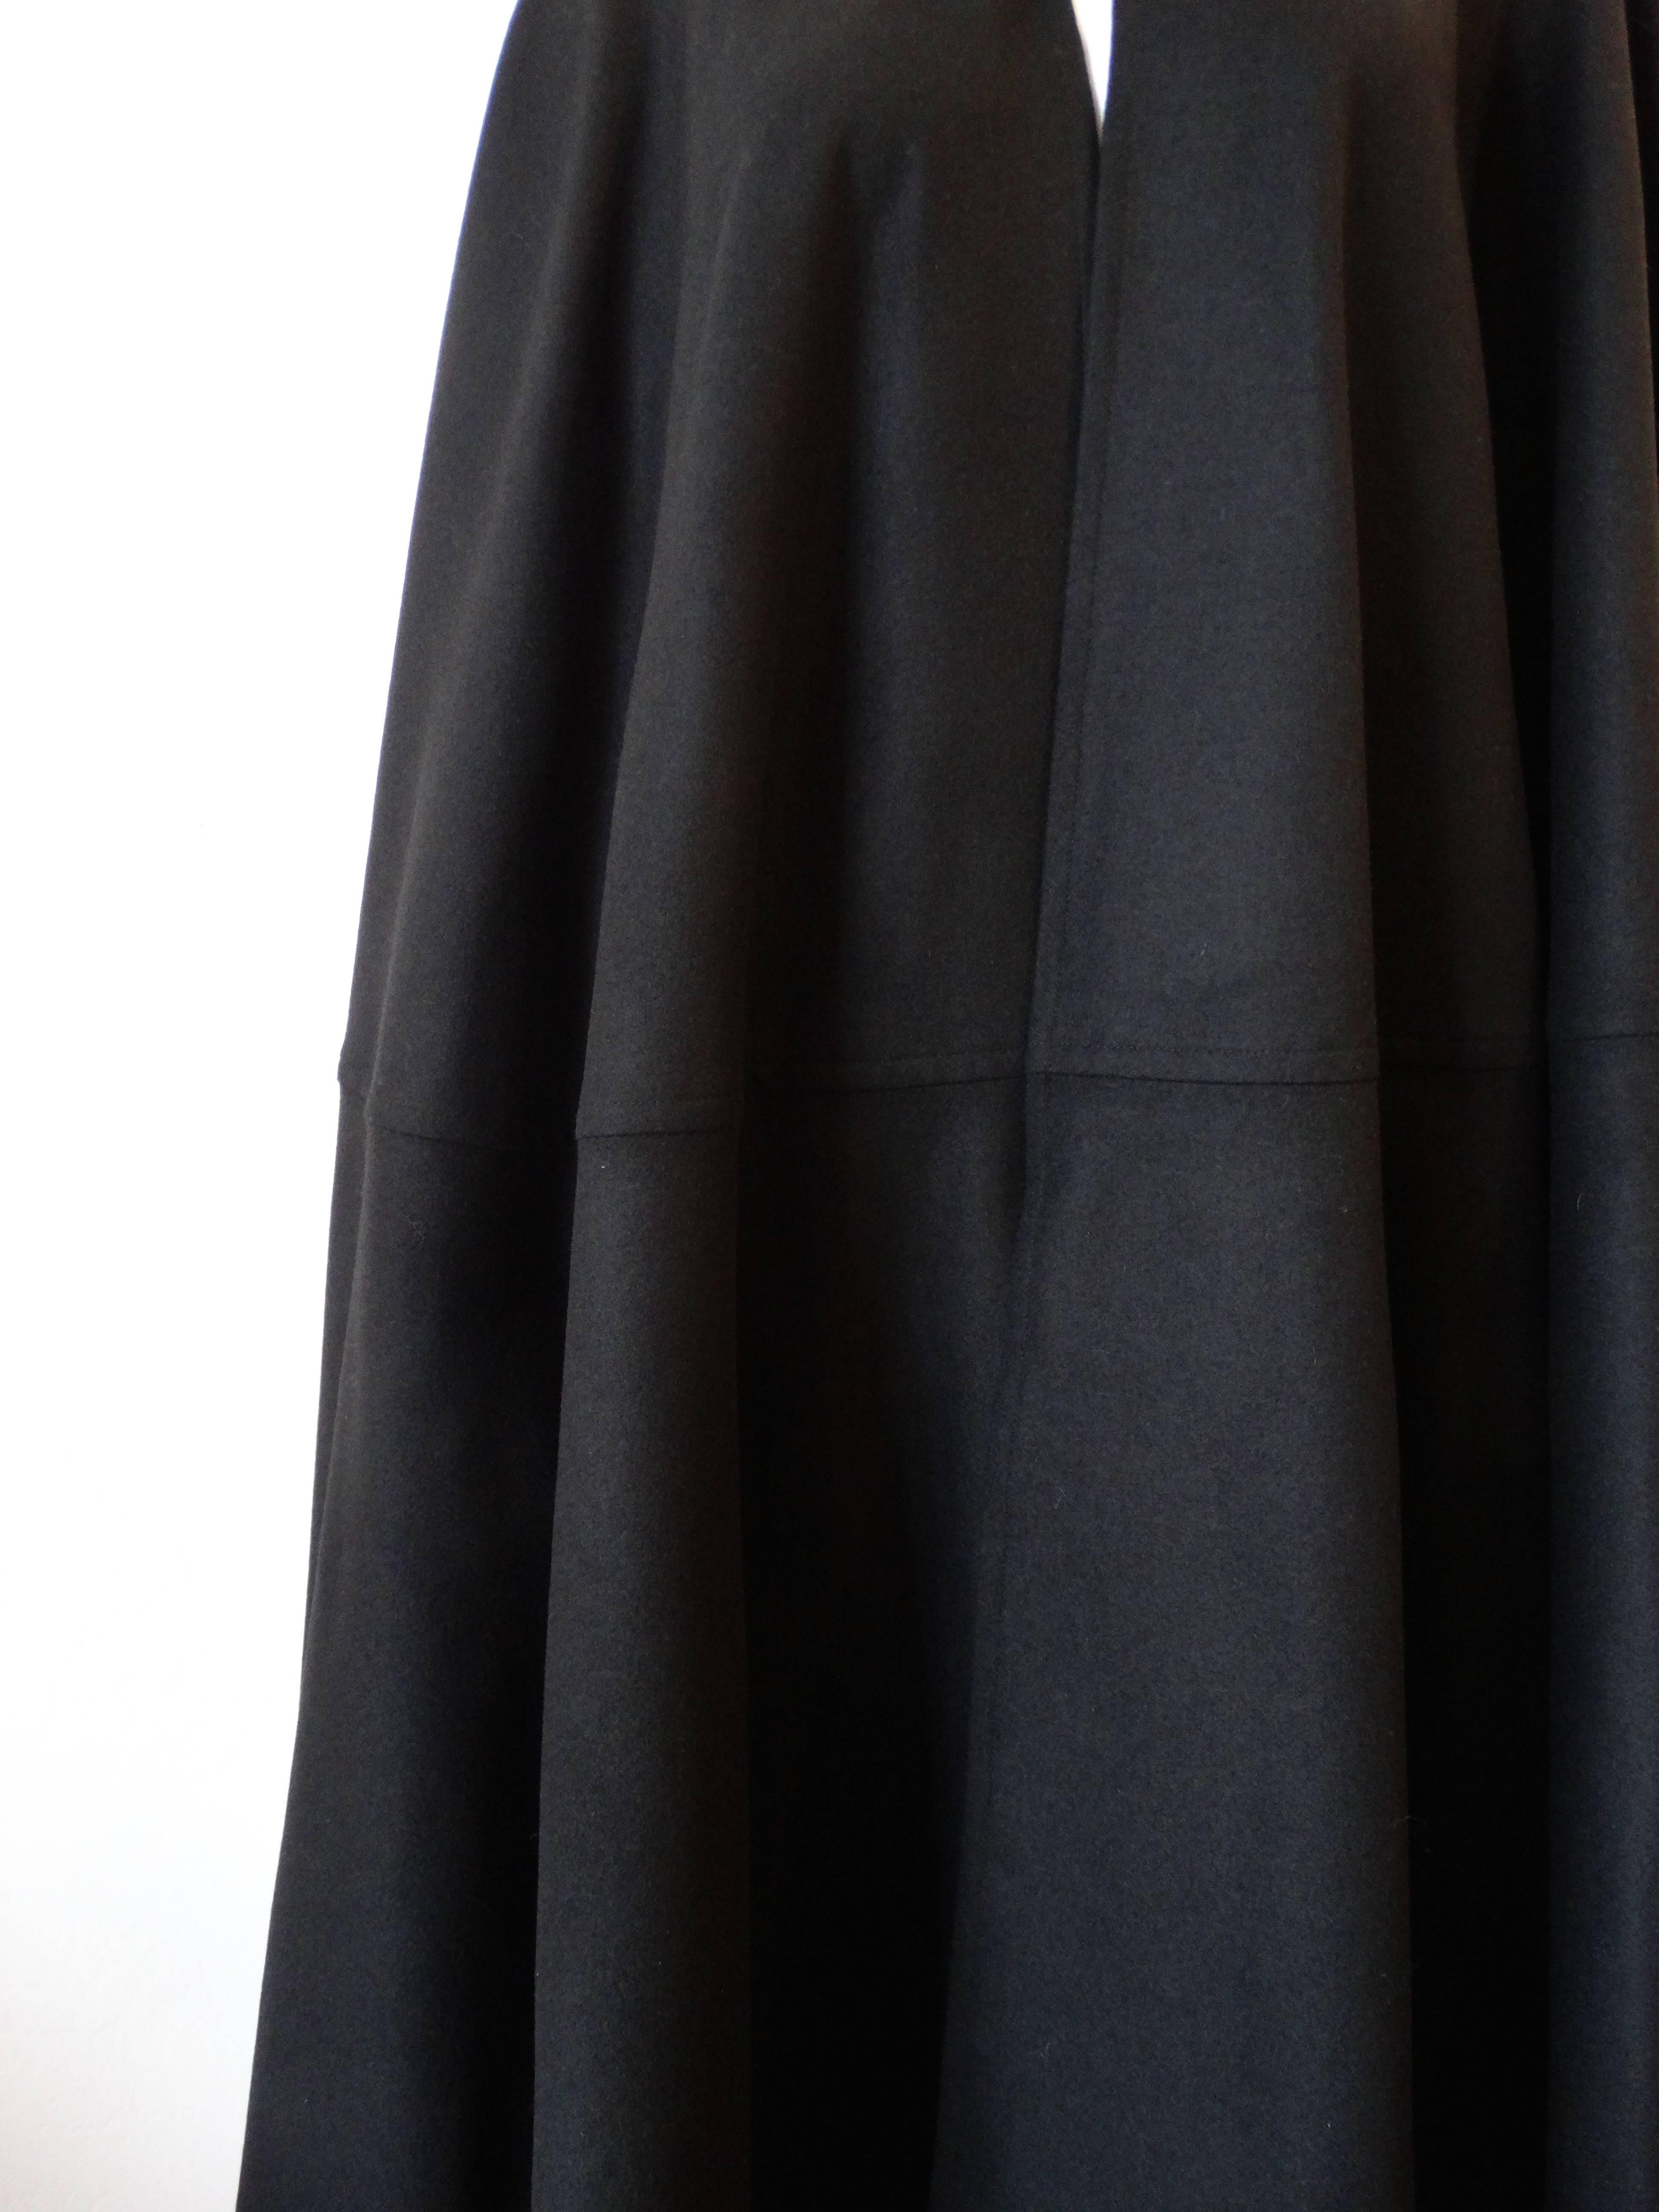 The 1990s does the 1970s with our amazing Yves Saint Laurent dramatic black cape! Made of a rich black wool fabric, this piece drapes beautifully on the body. Contrasted with multicolored rope closure at the neck, embellished with coral, lapis and